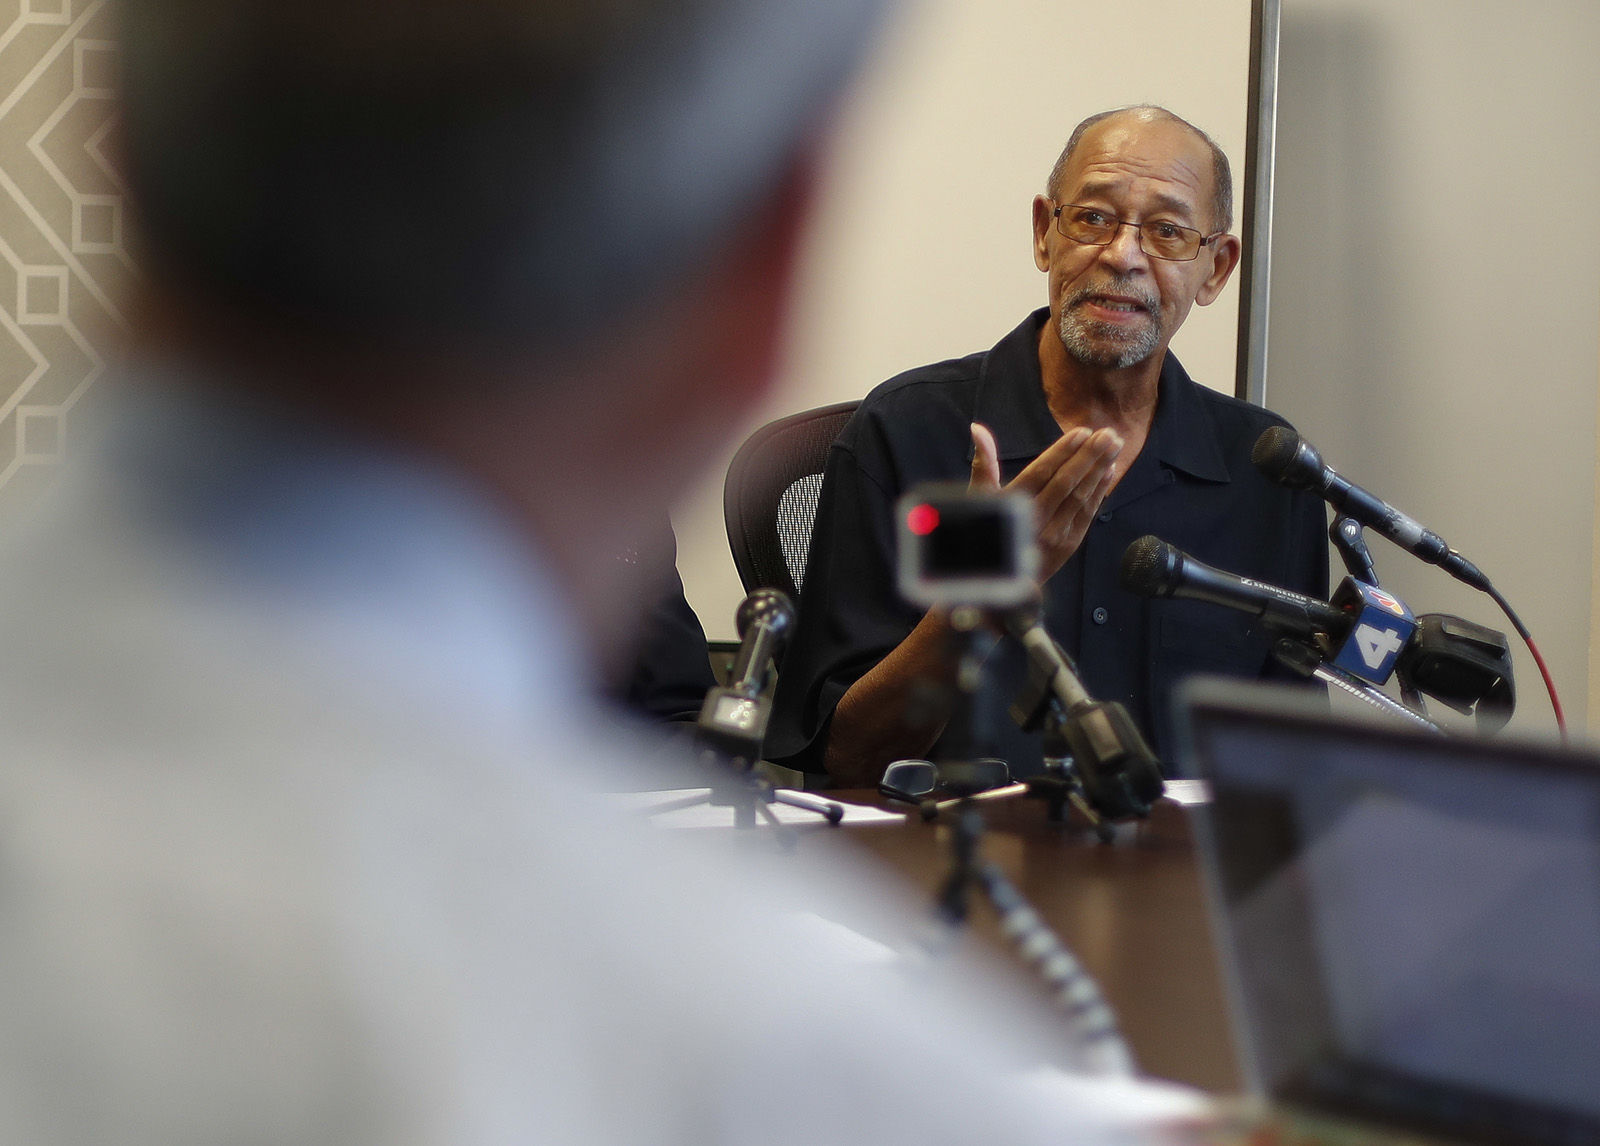 Phillip Butler, victim of a cross burning on his property forty years ago, speaks during a news conference at his attorney's office in Washington, Wednesday, Aug. 23, 2017. Forty years ago, Catholic Priest William Aitcheson, was a Ku Klux Klan "wizard", has come forward after decades as a Catholic priest, he's coming forward about his past. (AP Photo/Pablo Martinez Monsivais)